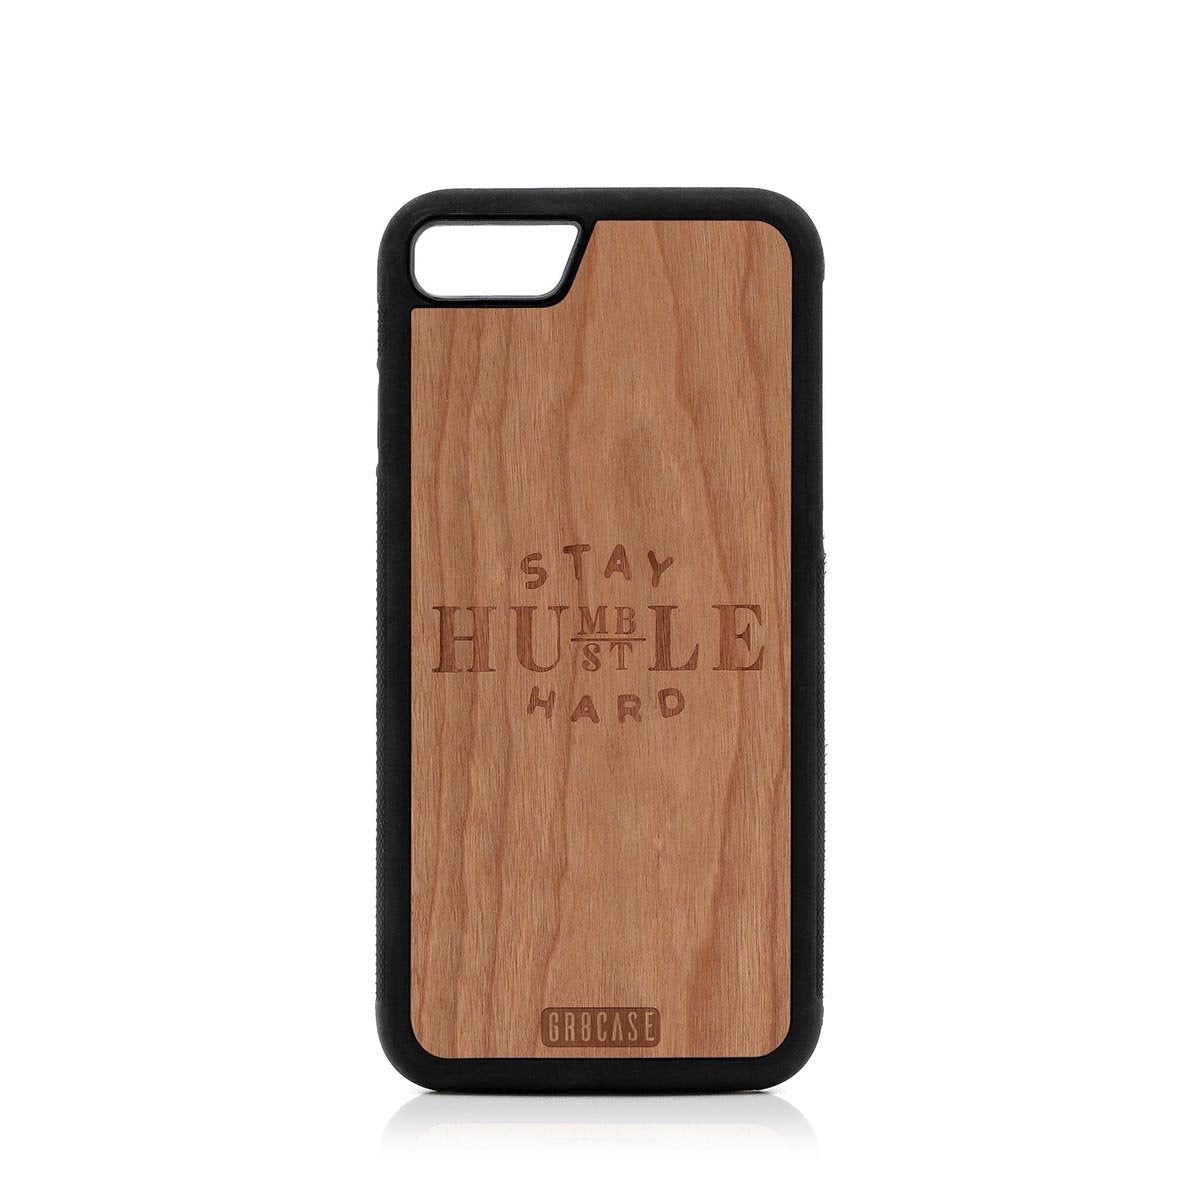 Stay Humble Hustle Hard Design Wood Case For iPhone SE 2020 by GR8CASE